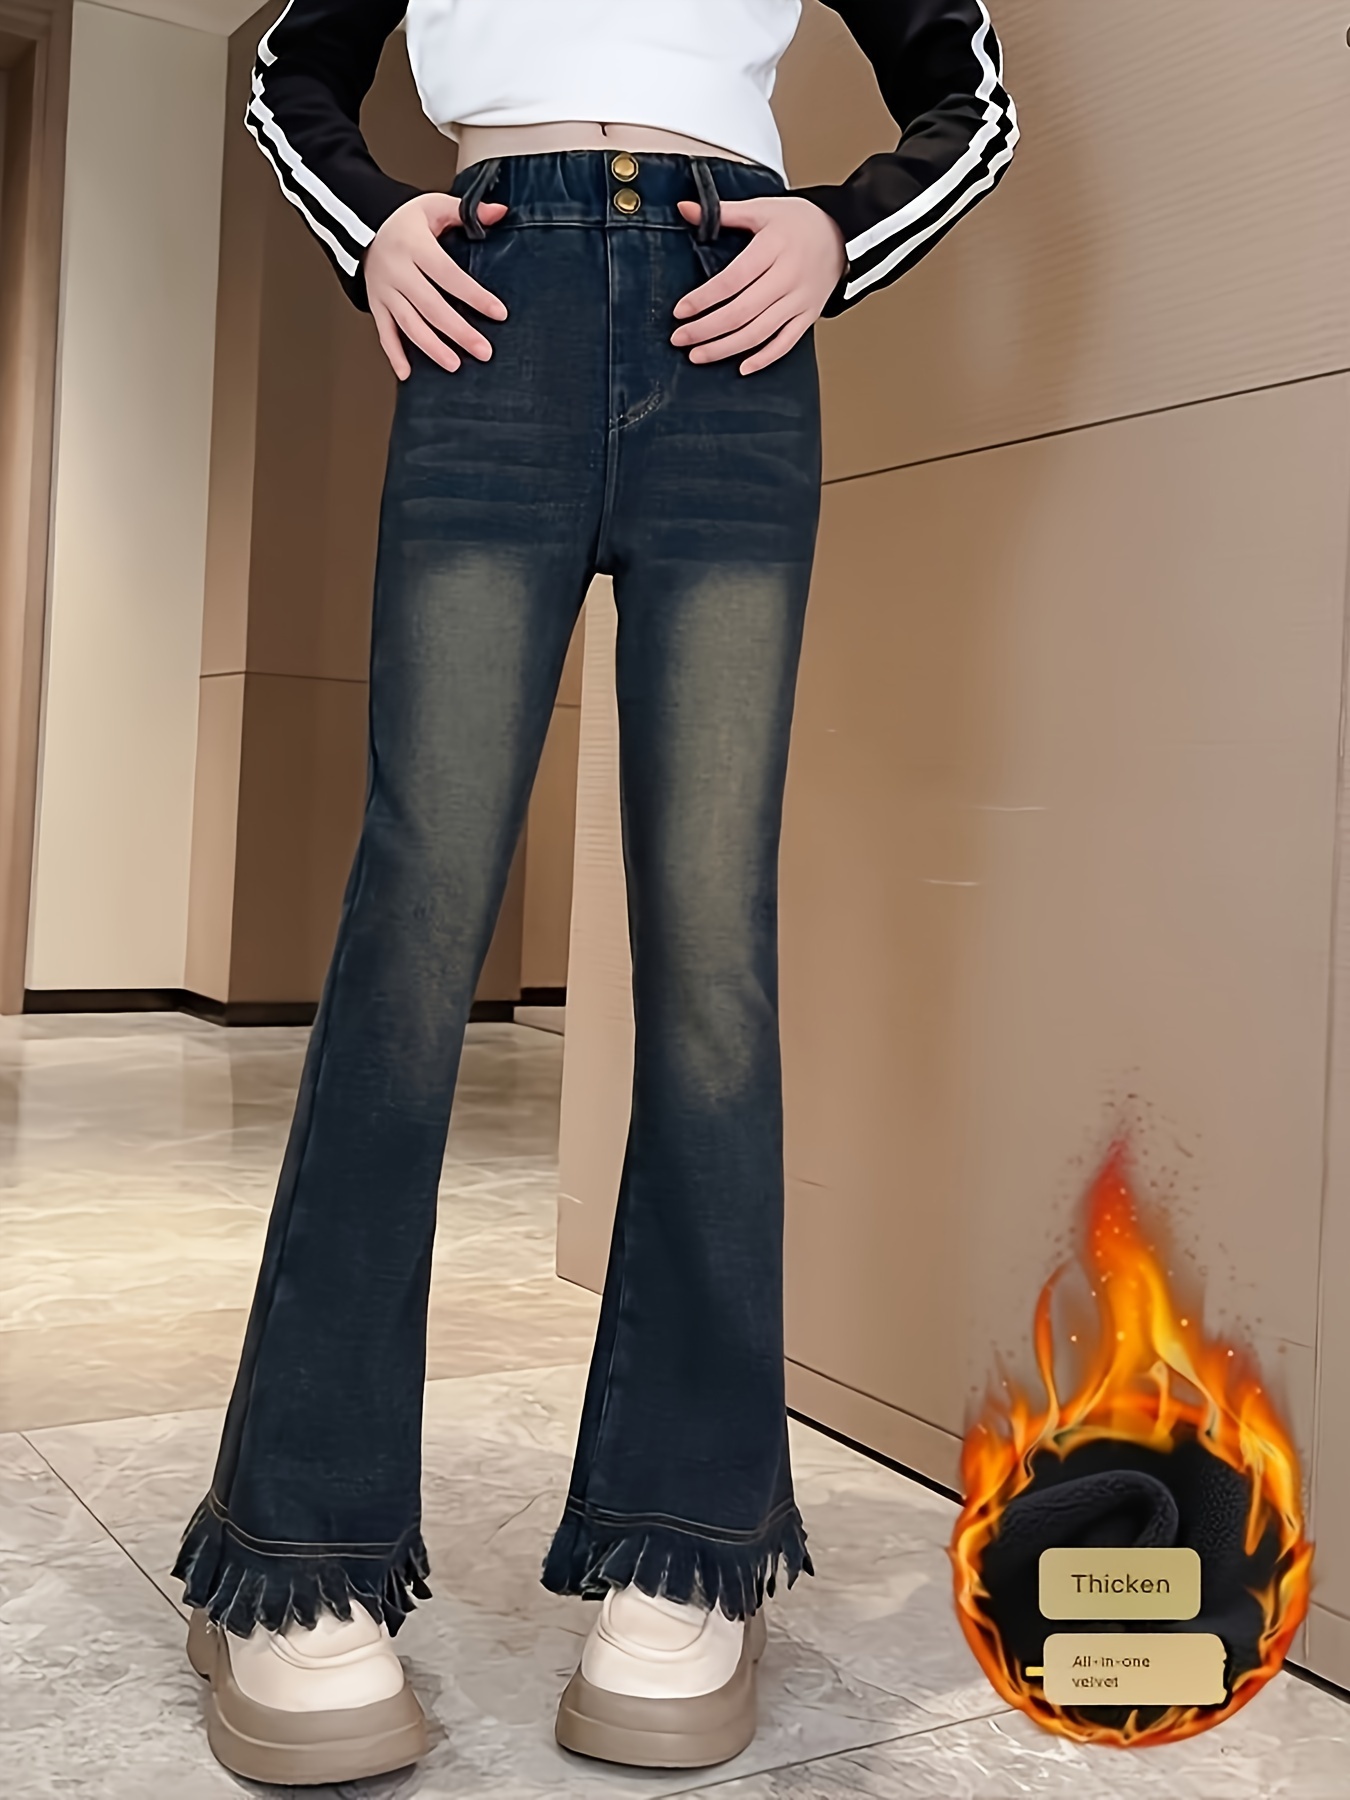 girls high rise flare jeans, girls new arrivals